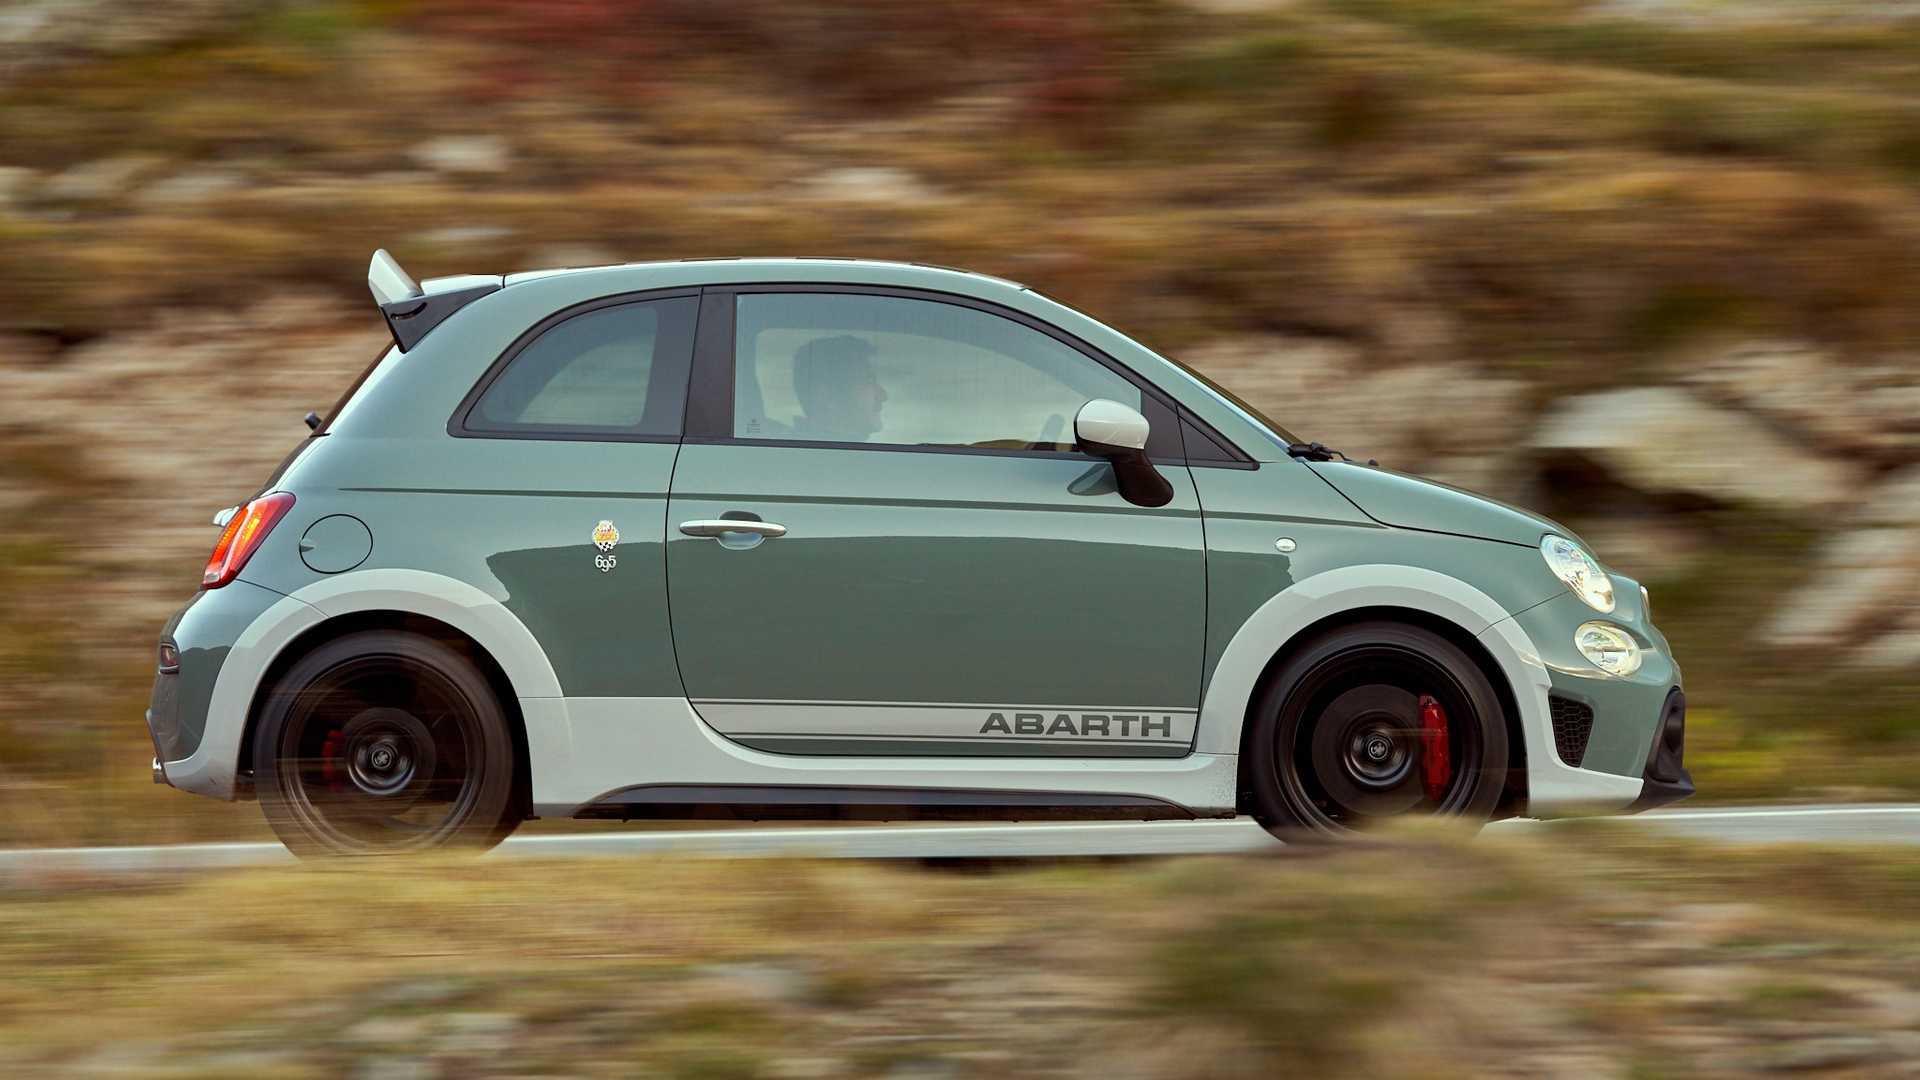 Abarth marks the brand's 70th anniversary in 2019, and what better way to celebrate this milestone if not by creating the perfect spoiler.